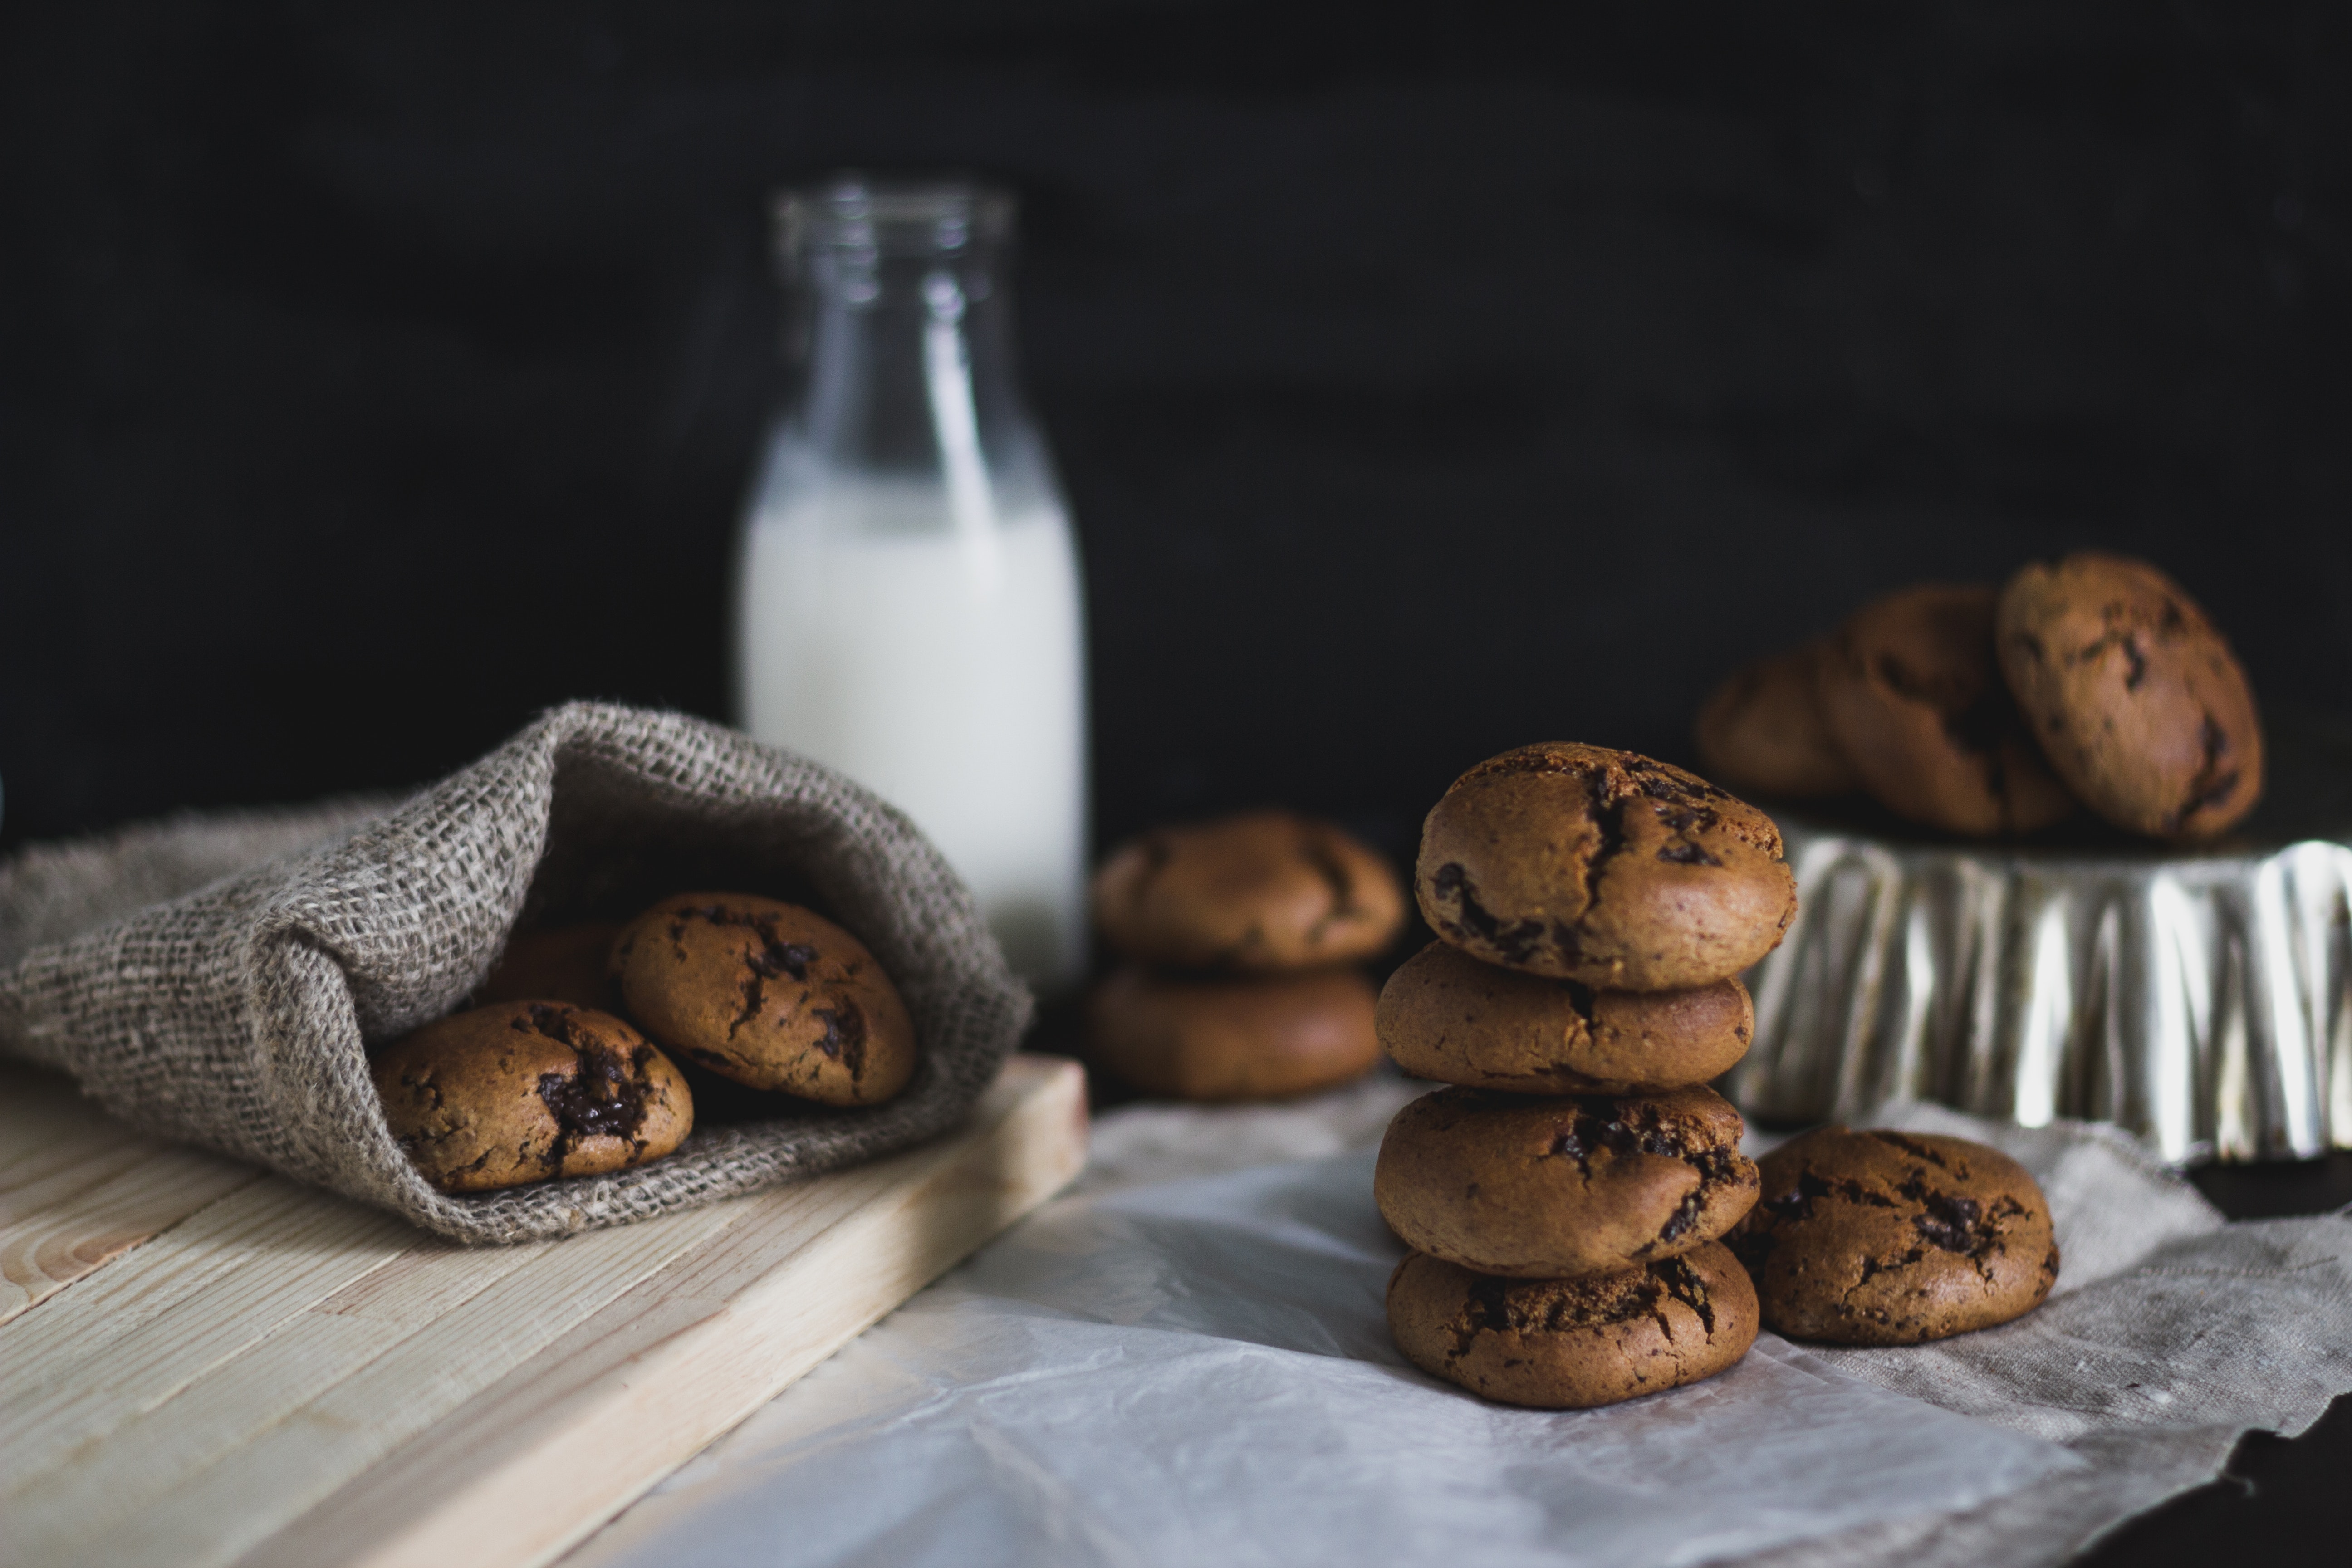 Baked cookies and a bottle of milk on a table